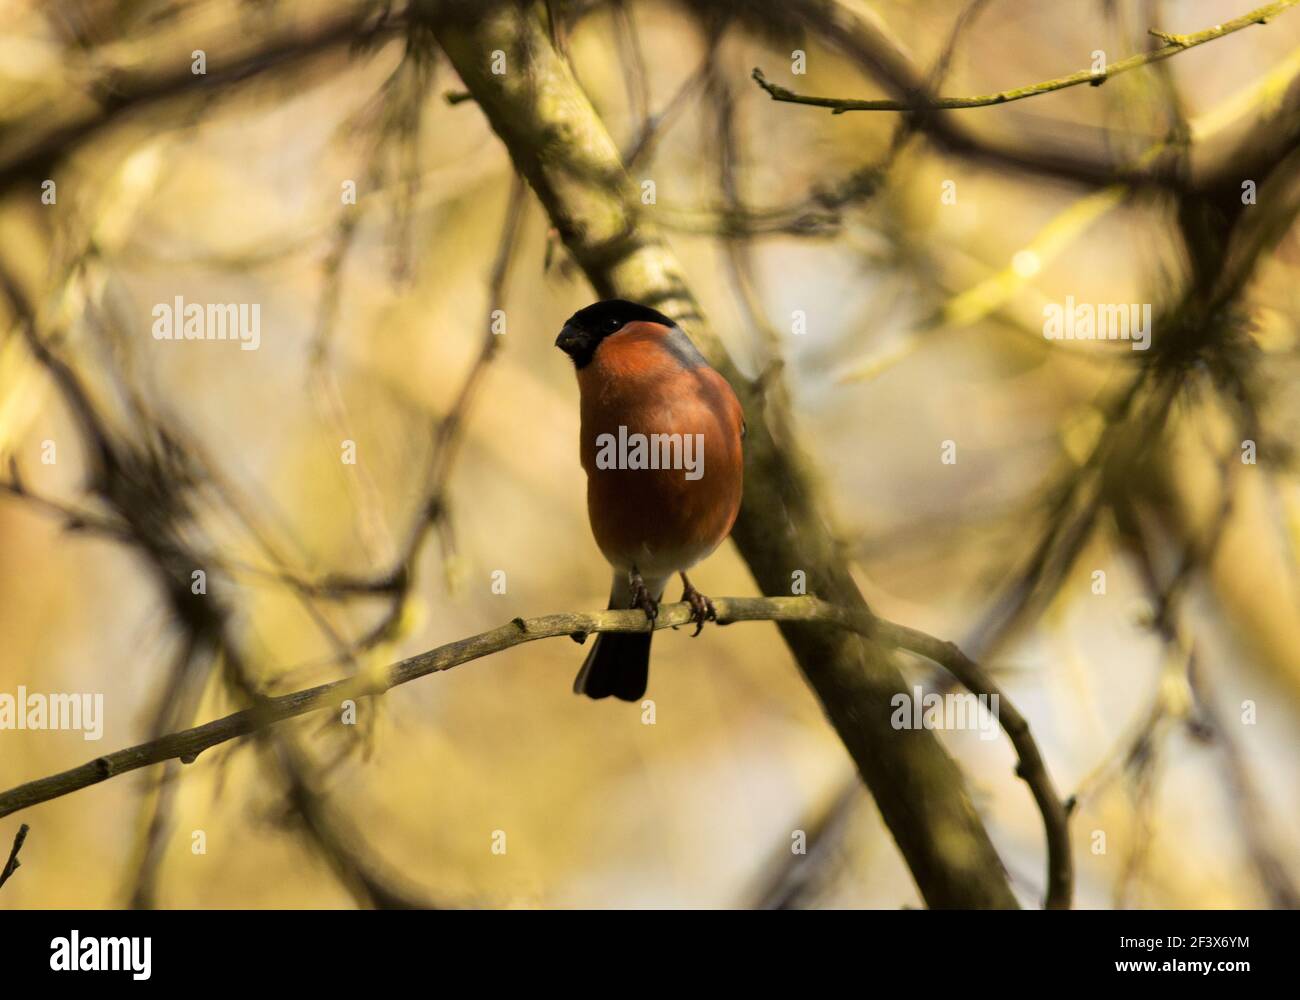 The Bullfinch is a reasonably common bird of British parks and gardens, though they are shy and furtive birds. This is the male with brilliant colours Stock Photo